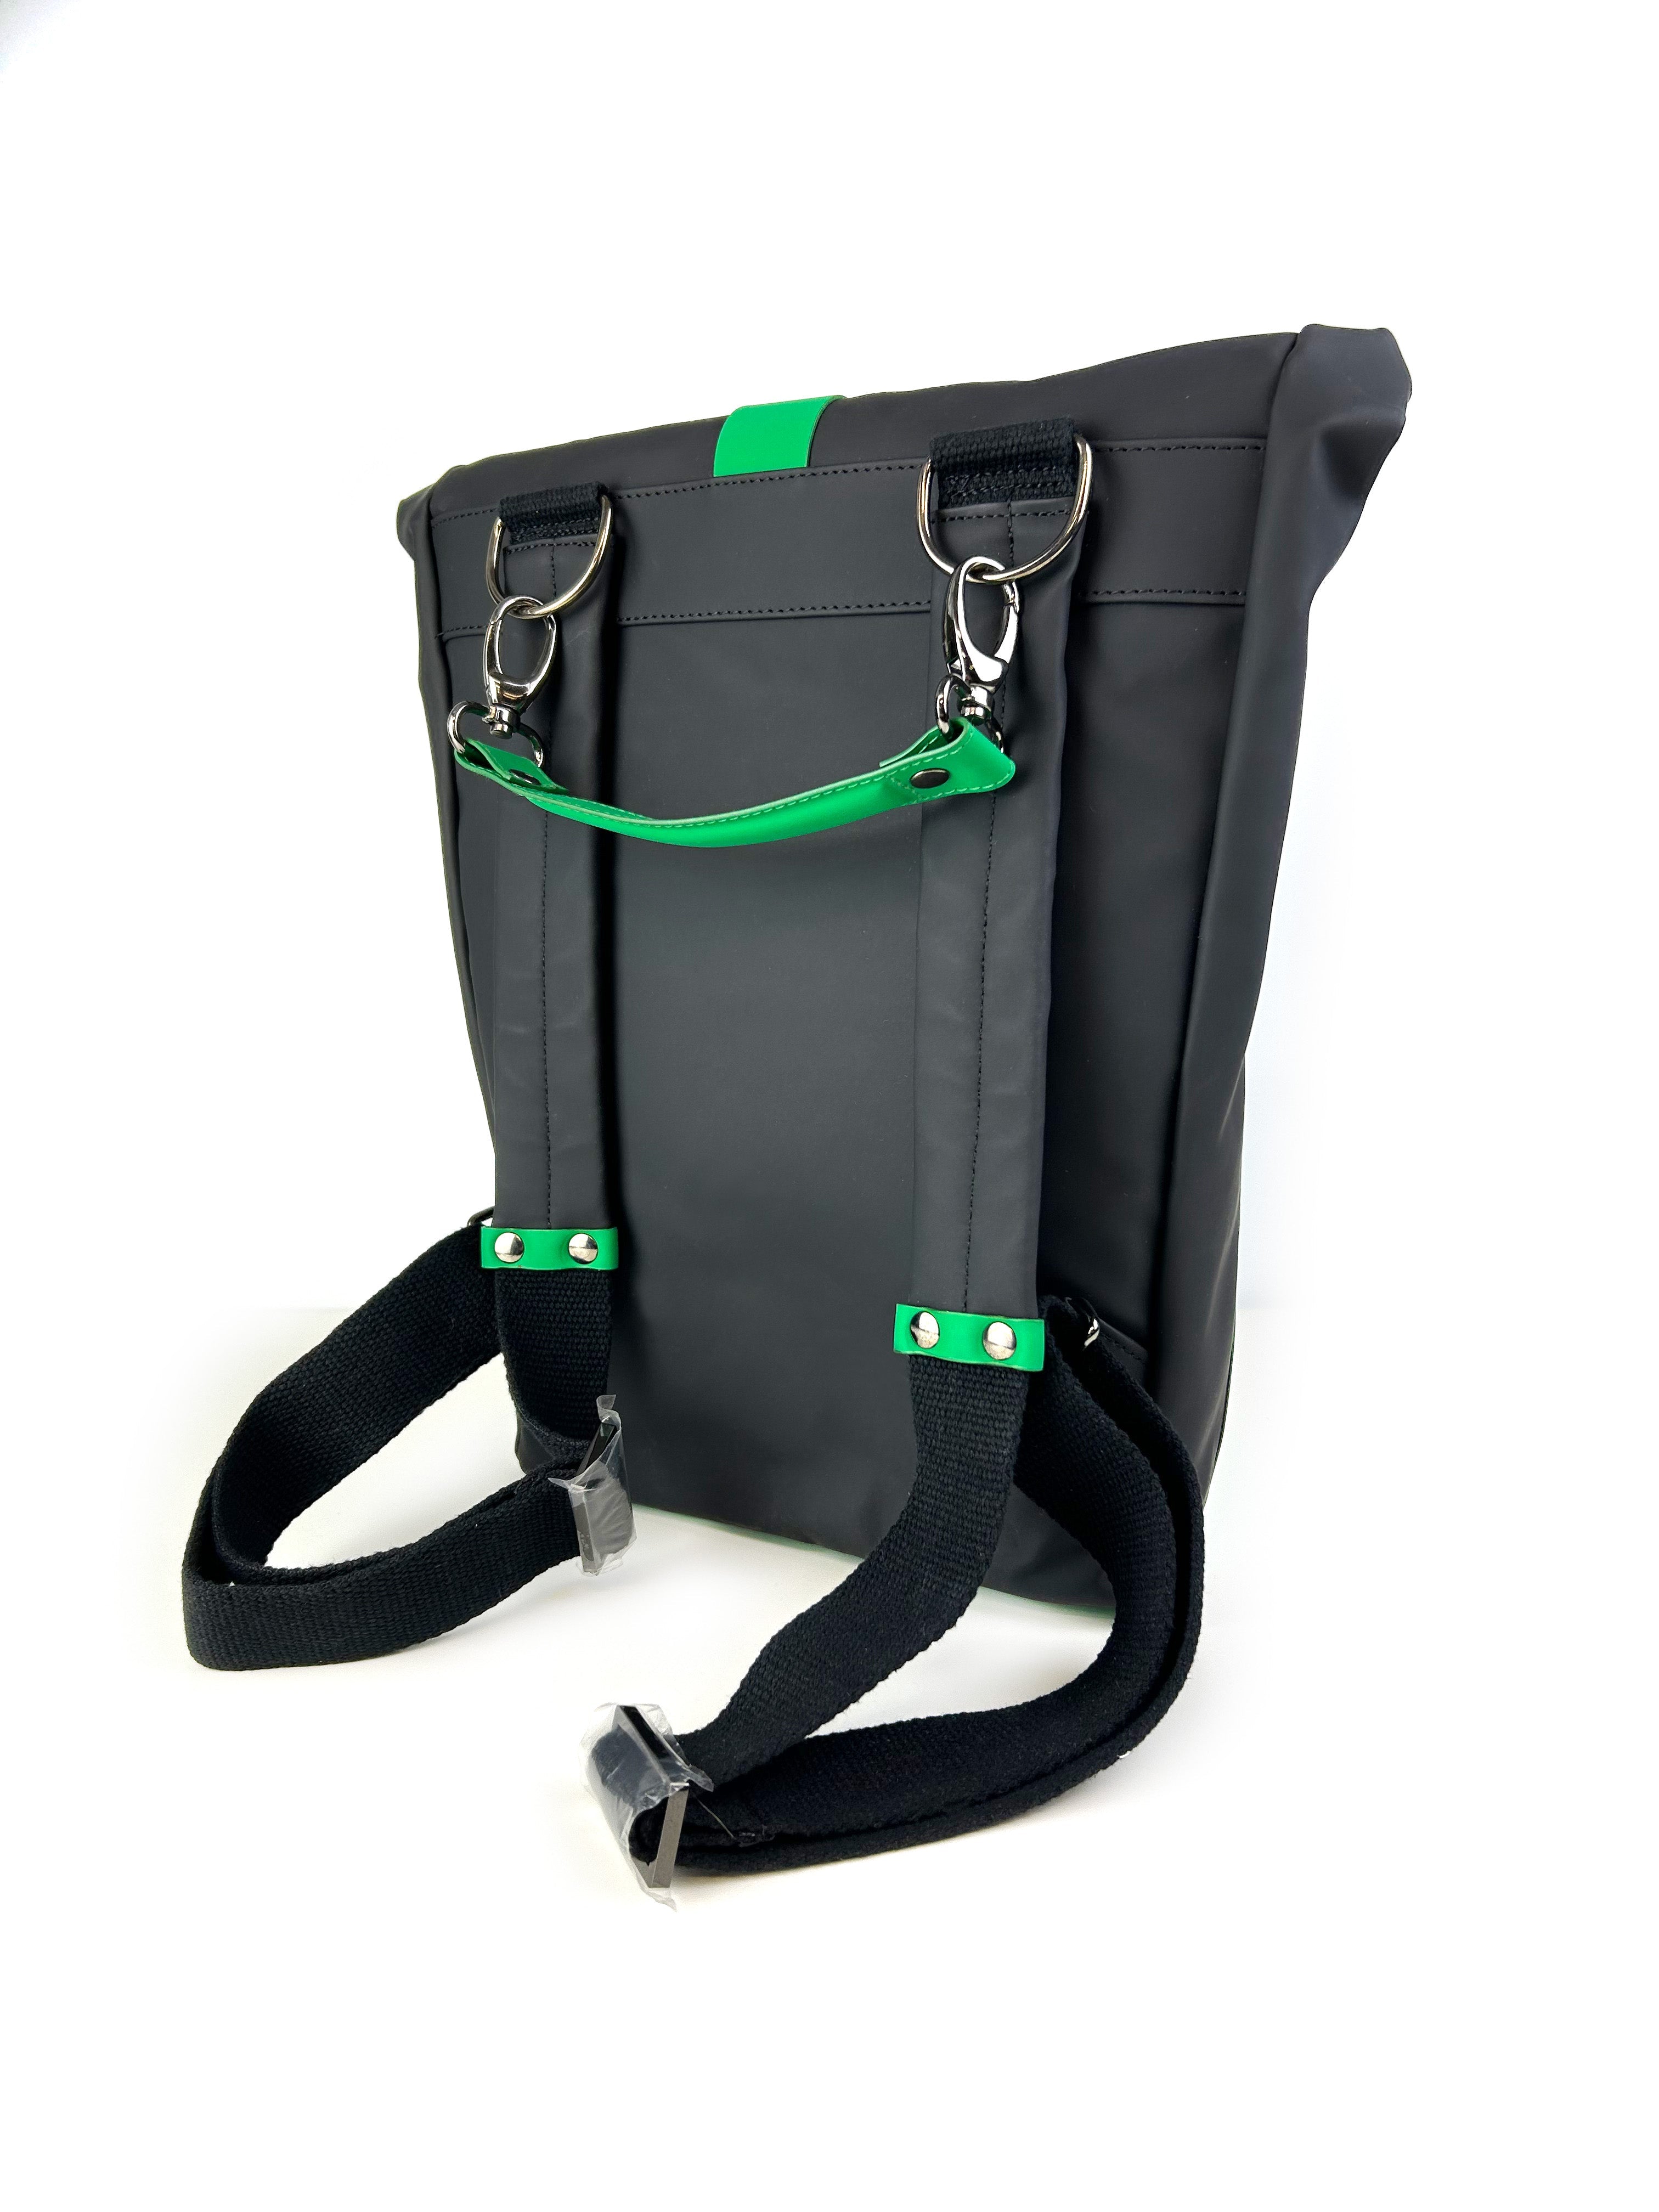 Reverse side of HADLEY Waterproof Backpack in green, showing padded leather shoulder straps and anti-slip cotton lining